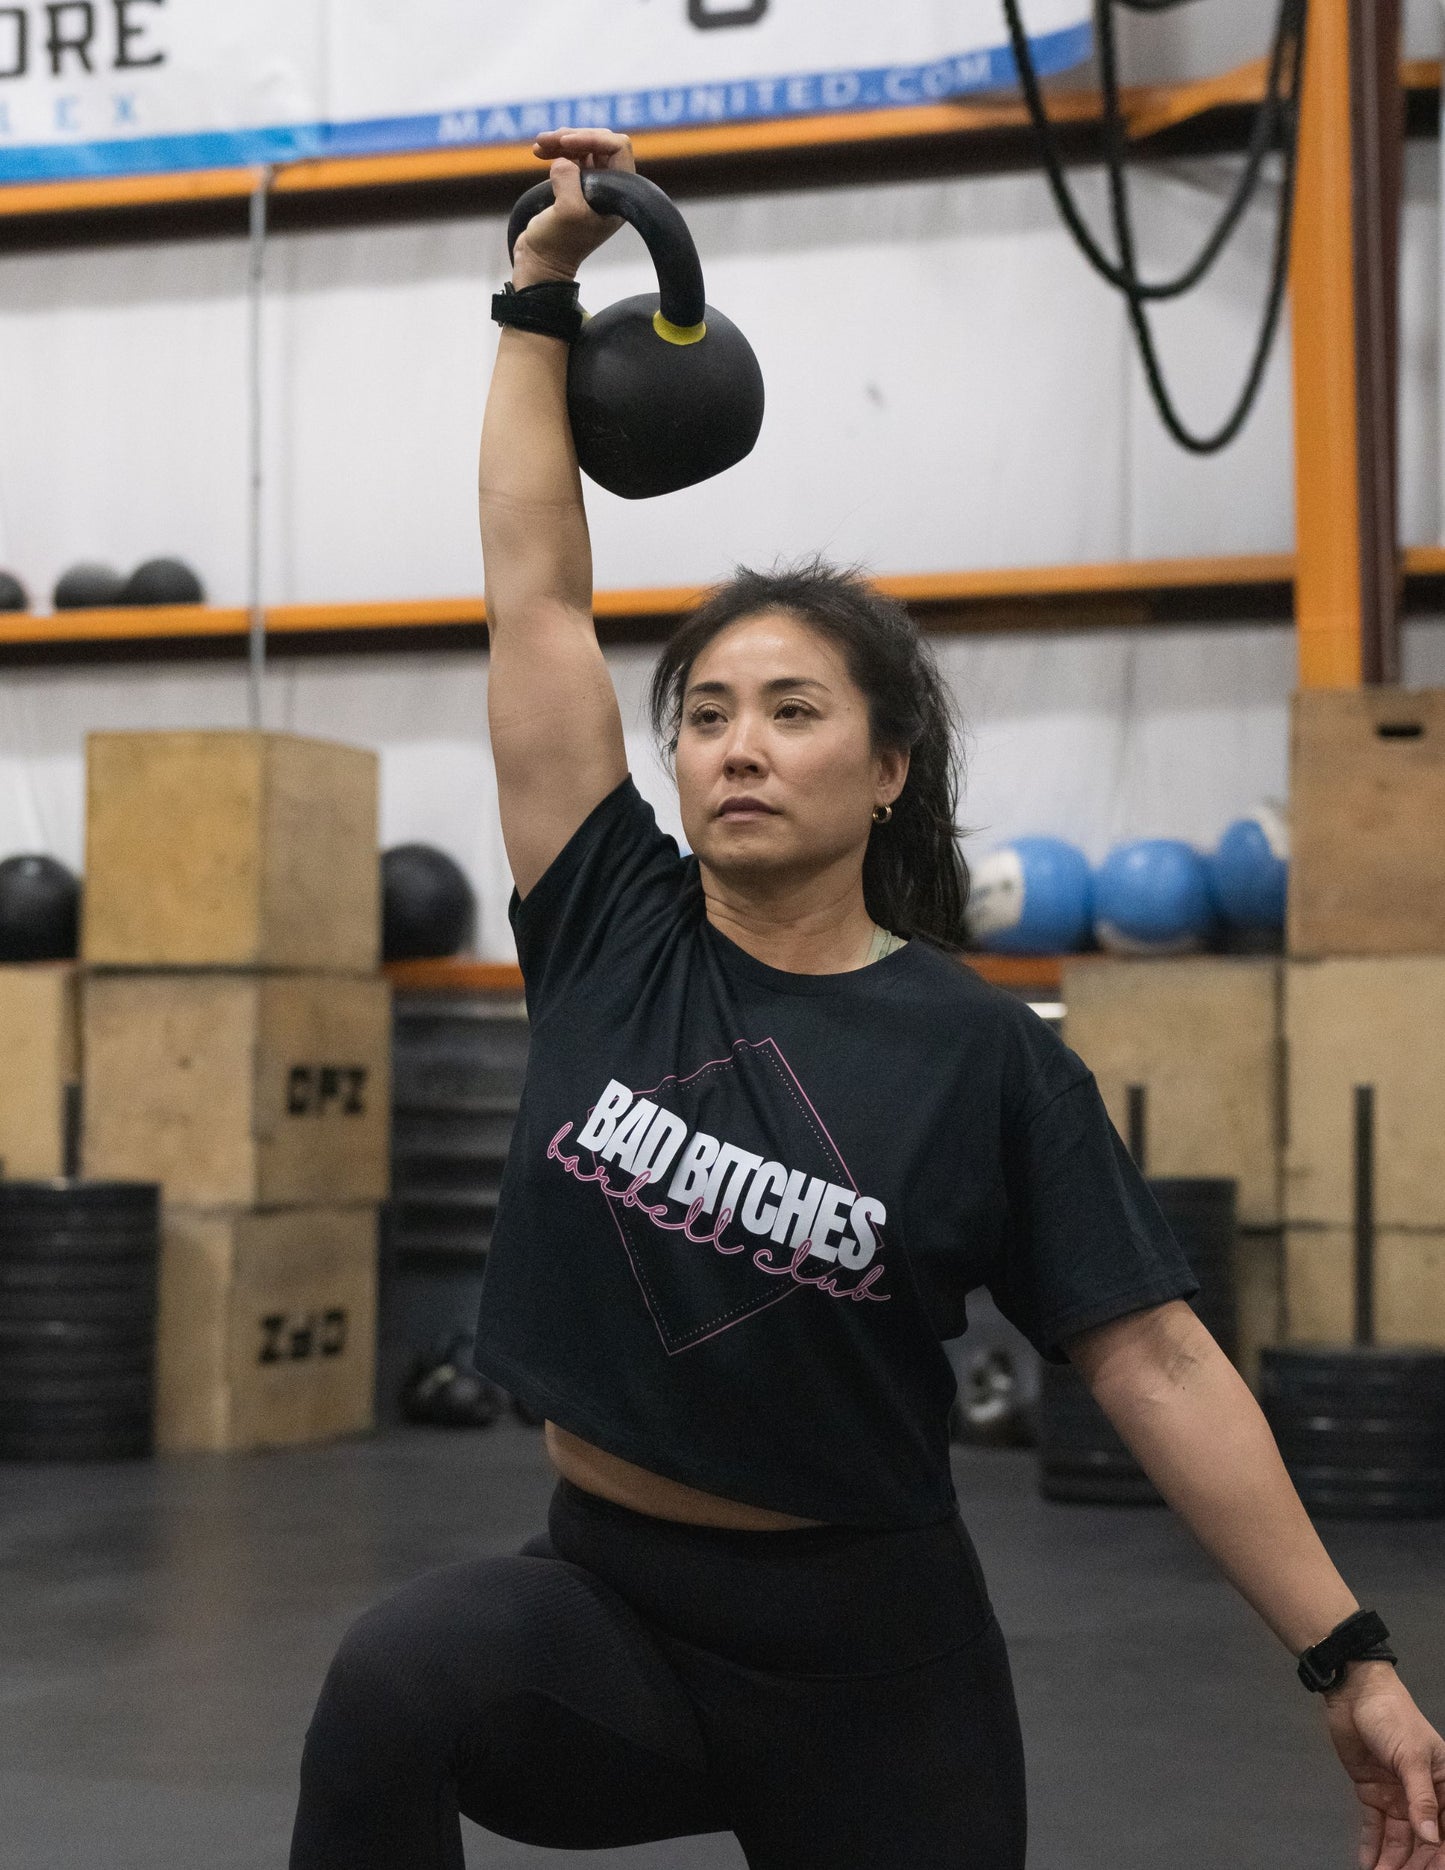 BAD BITCHES BARBELL CLUB CROPPED TEE